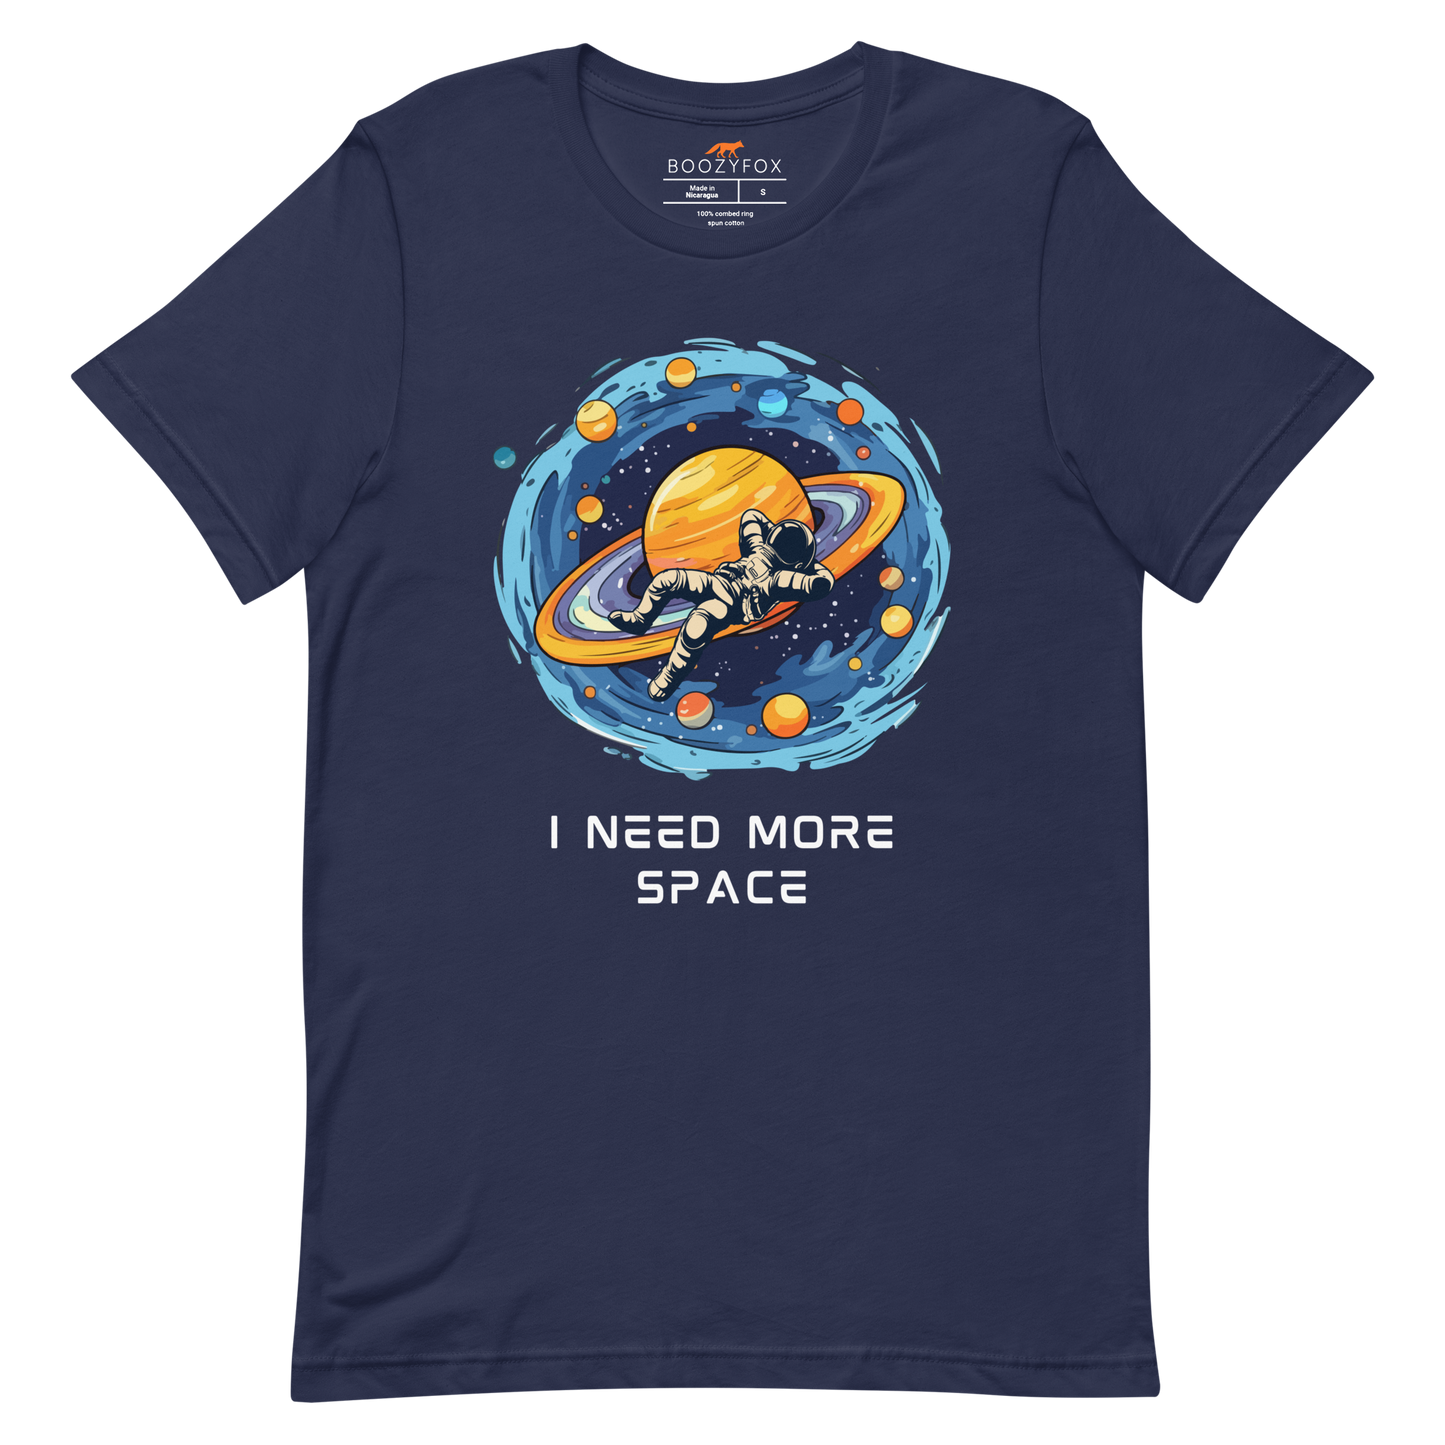 Navy Premium Astronaut Tee featuring a captivating I Need More Space graphic on the chest - Funny Graphic Space Tees - Boozy Fox